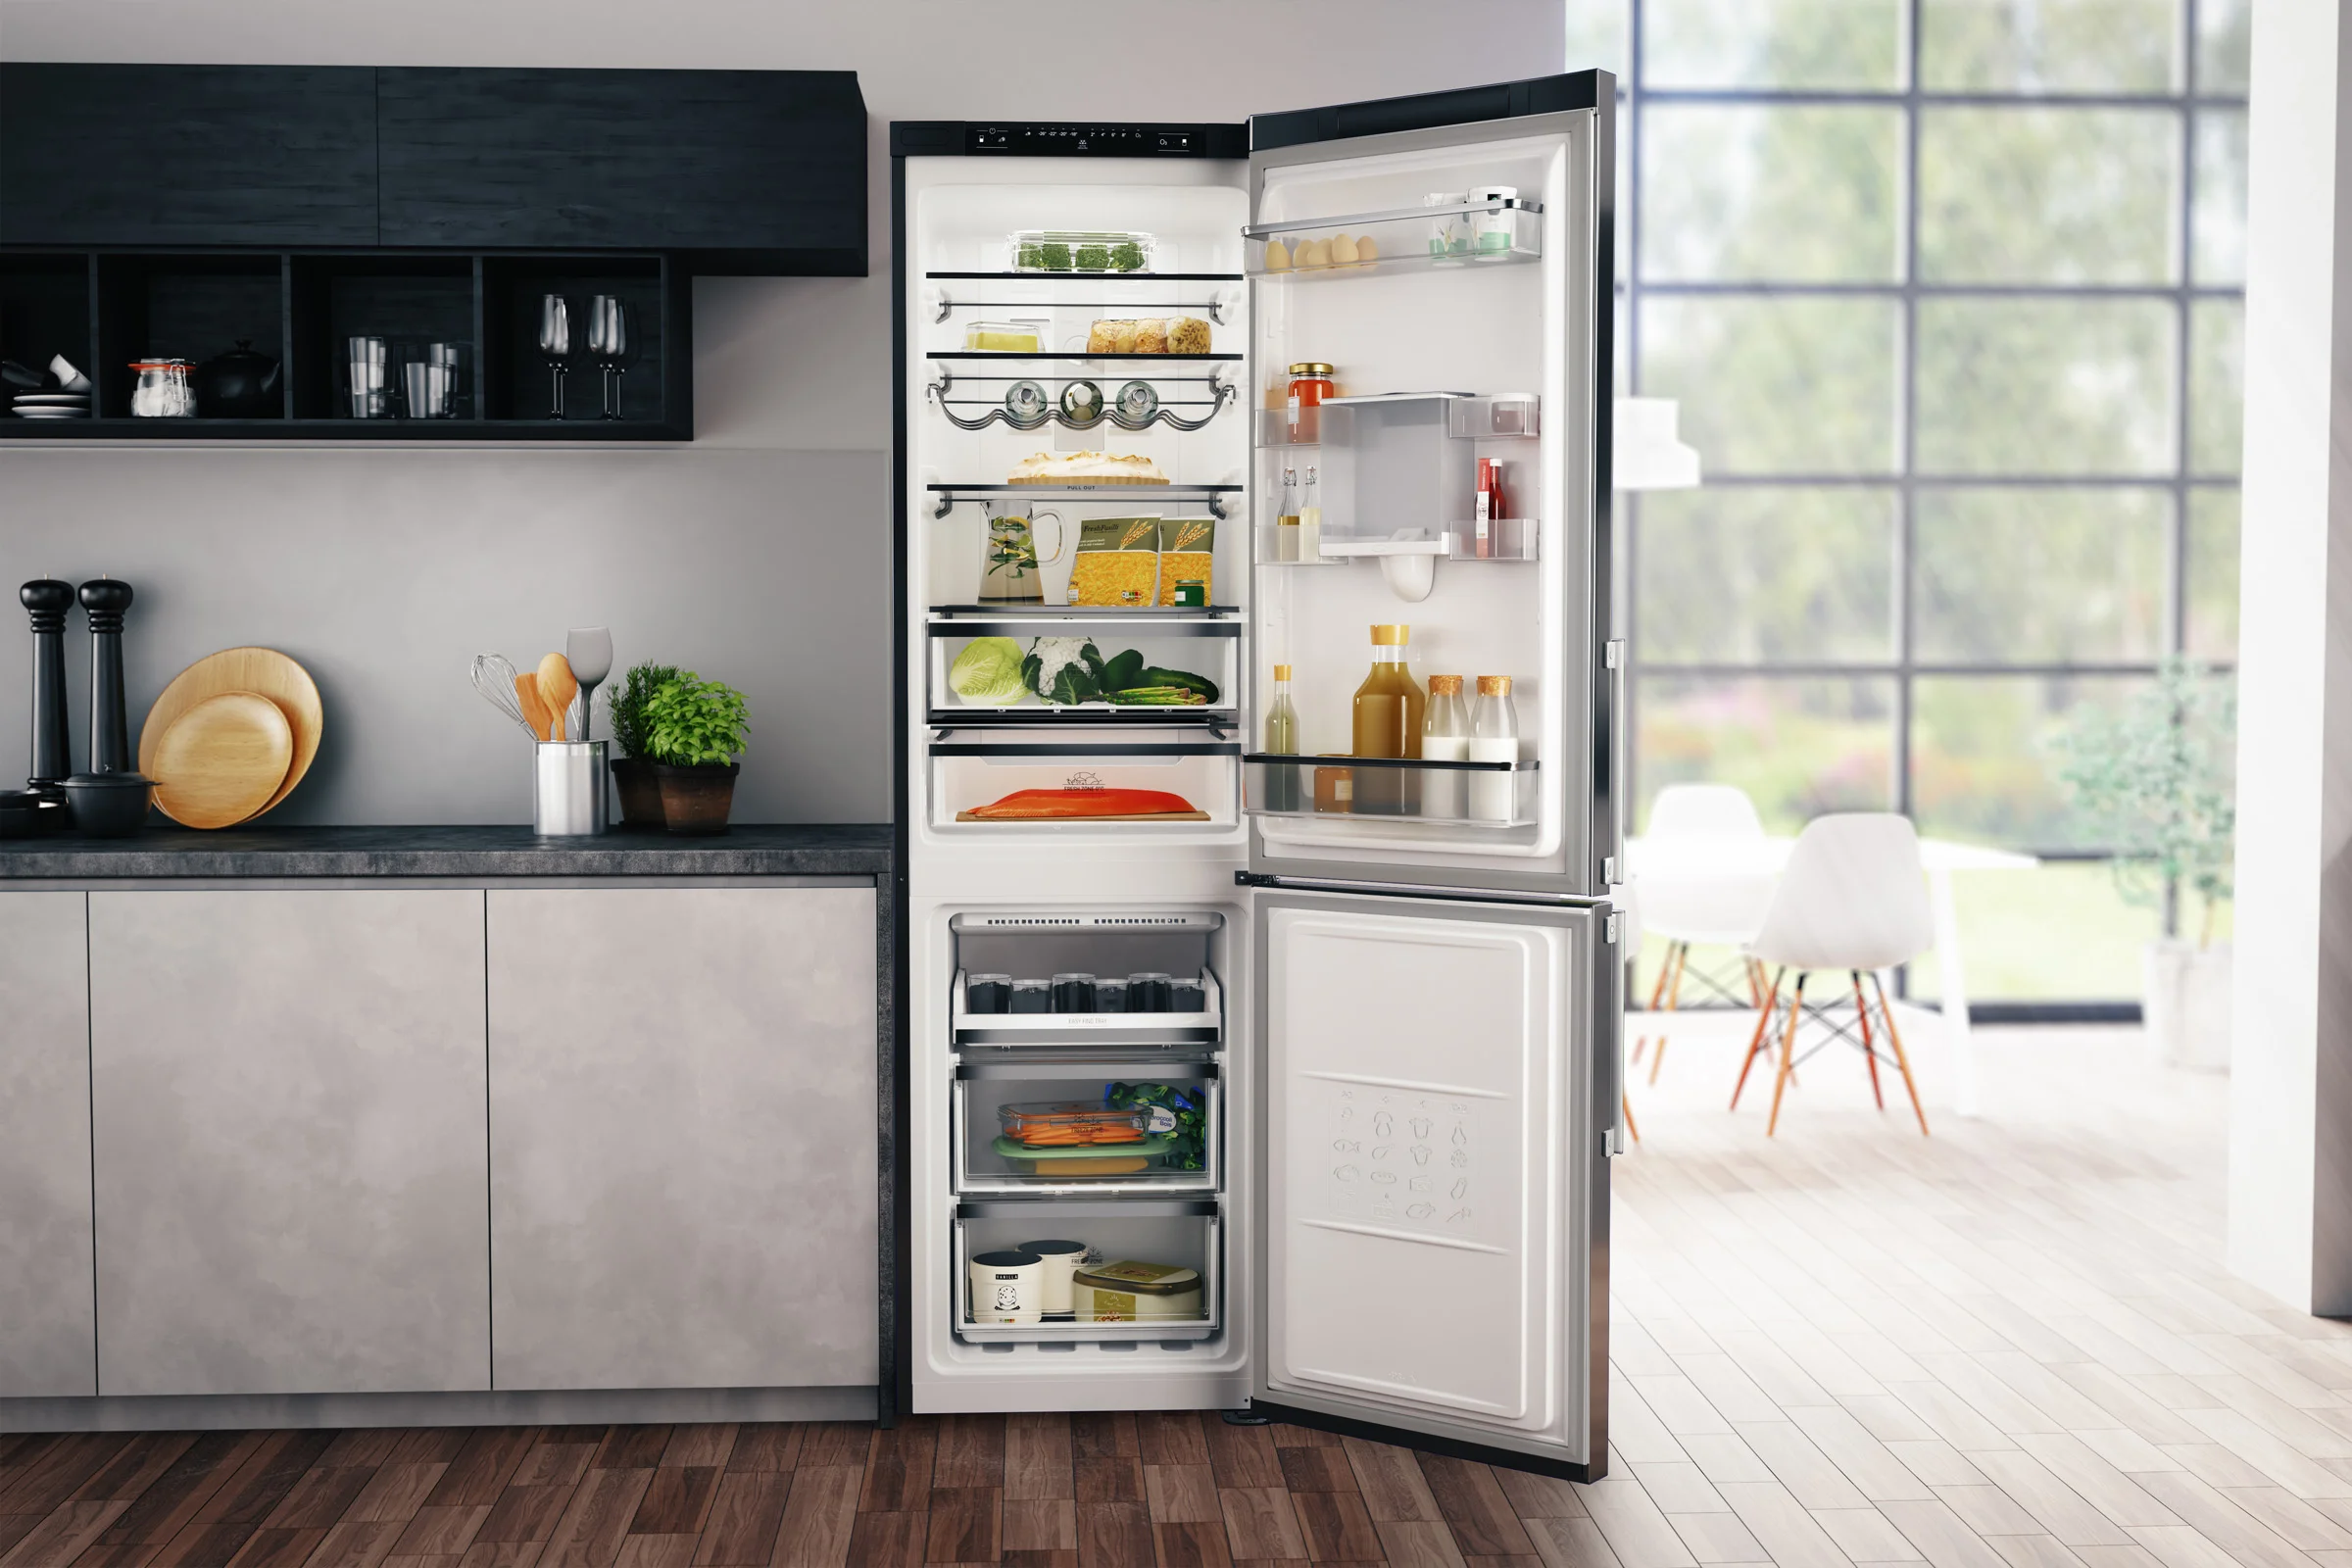 Why Your Hotpoint Freezer Isn’t Freezing: Causes and Solutions